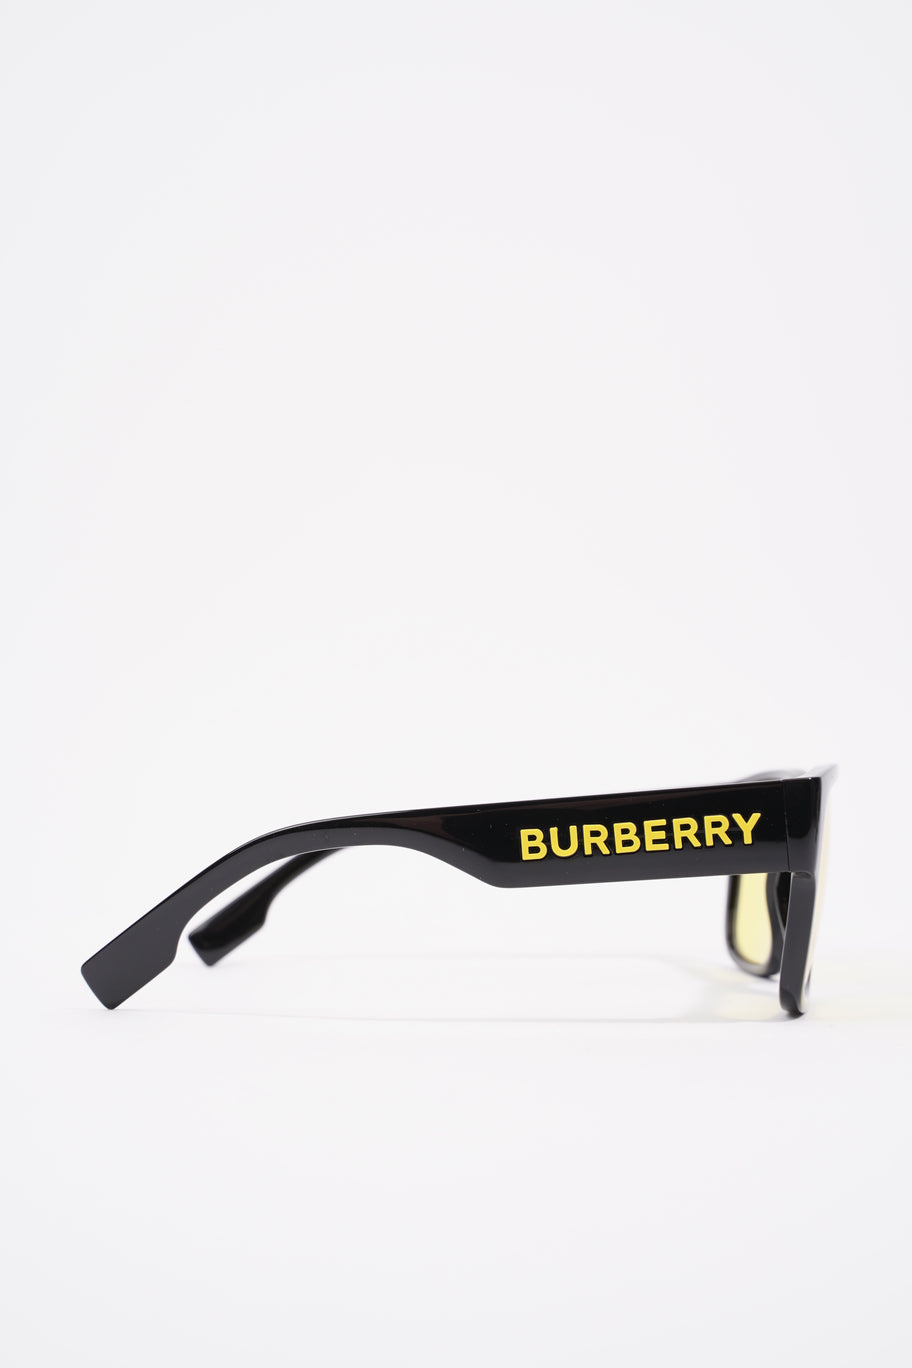 Knight Square Tinted Sunglasses Black / Yellow Acetate 145mm Image 5